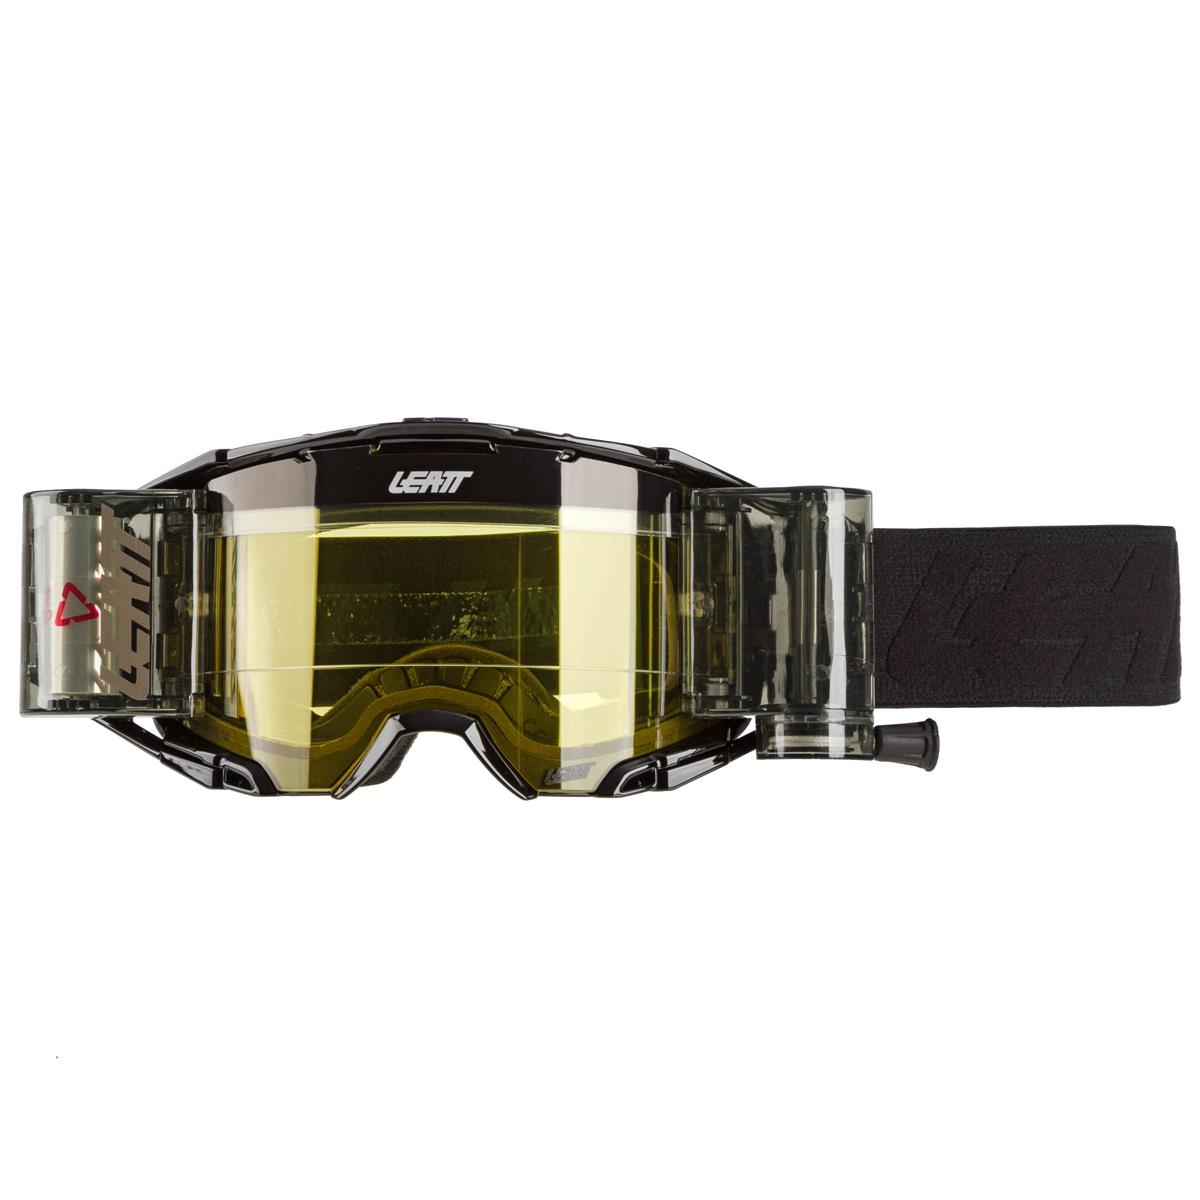 Leatt Goggle Velocity 6.5 with Roll Off System, Black/Grey - Yellow